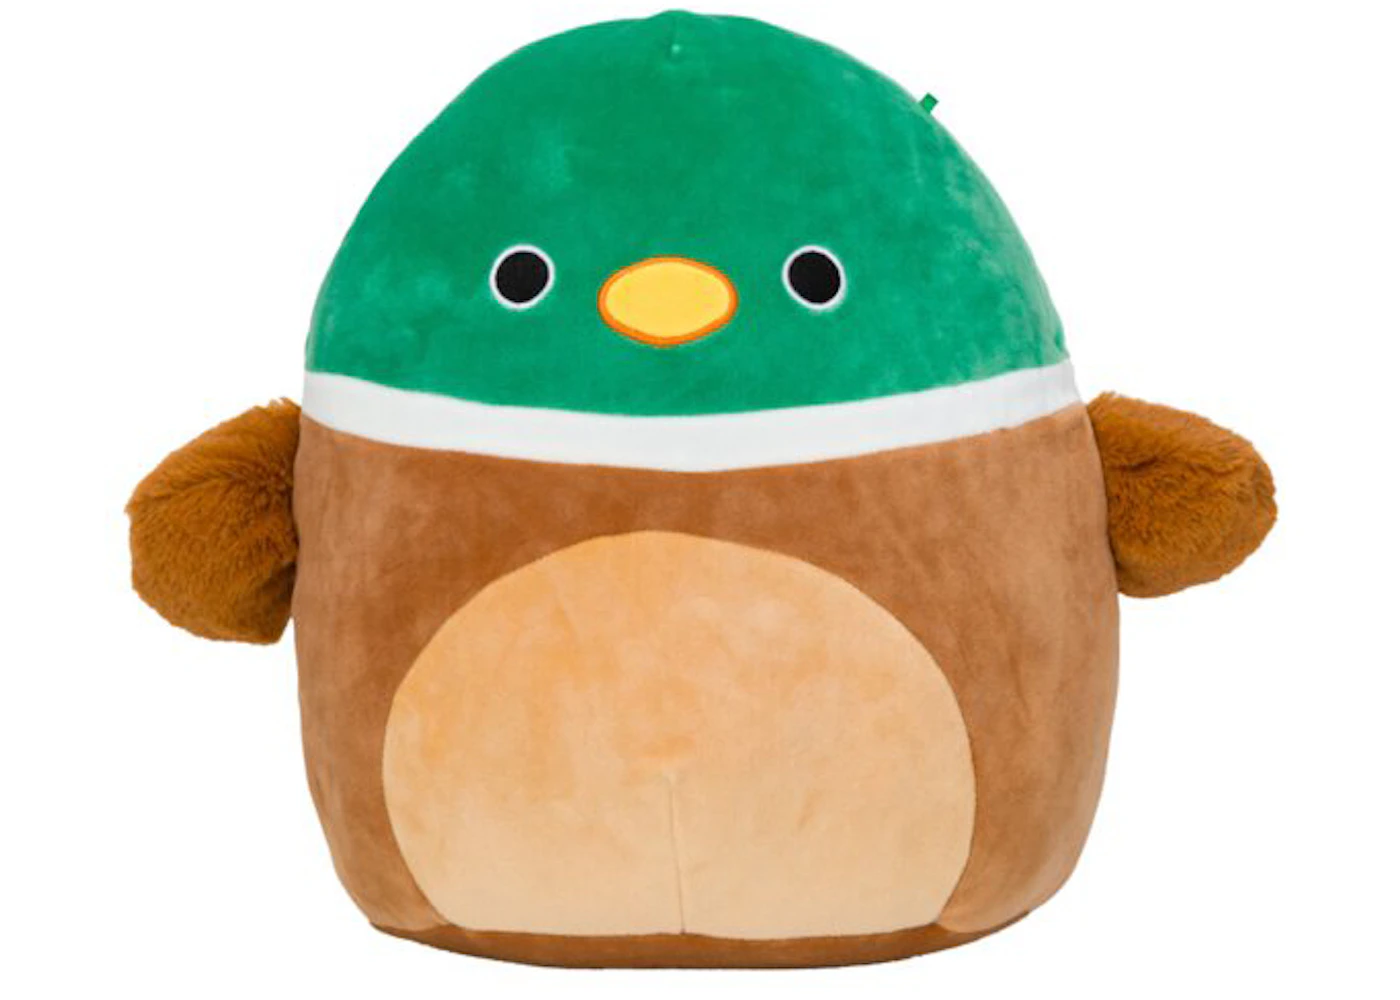 https://images.stockx.com/images/Squishmallow-Avery-The-Mallard-Duck-16-Inch-Plush-Green-Brown.jpg?fit=fill&bg=FFFFFF&w=700&h=500&fm=webp&auto=compress&q=90&dpr=2&trim=color&updated_at=1617819376